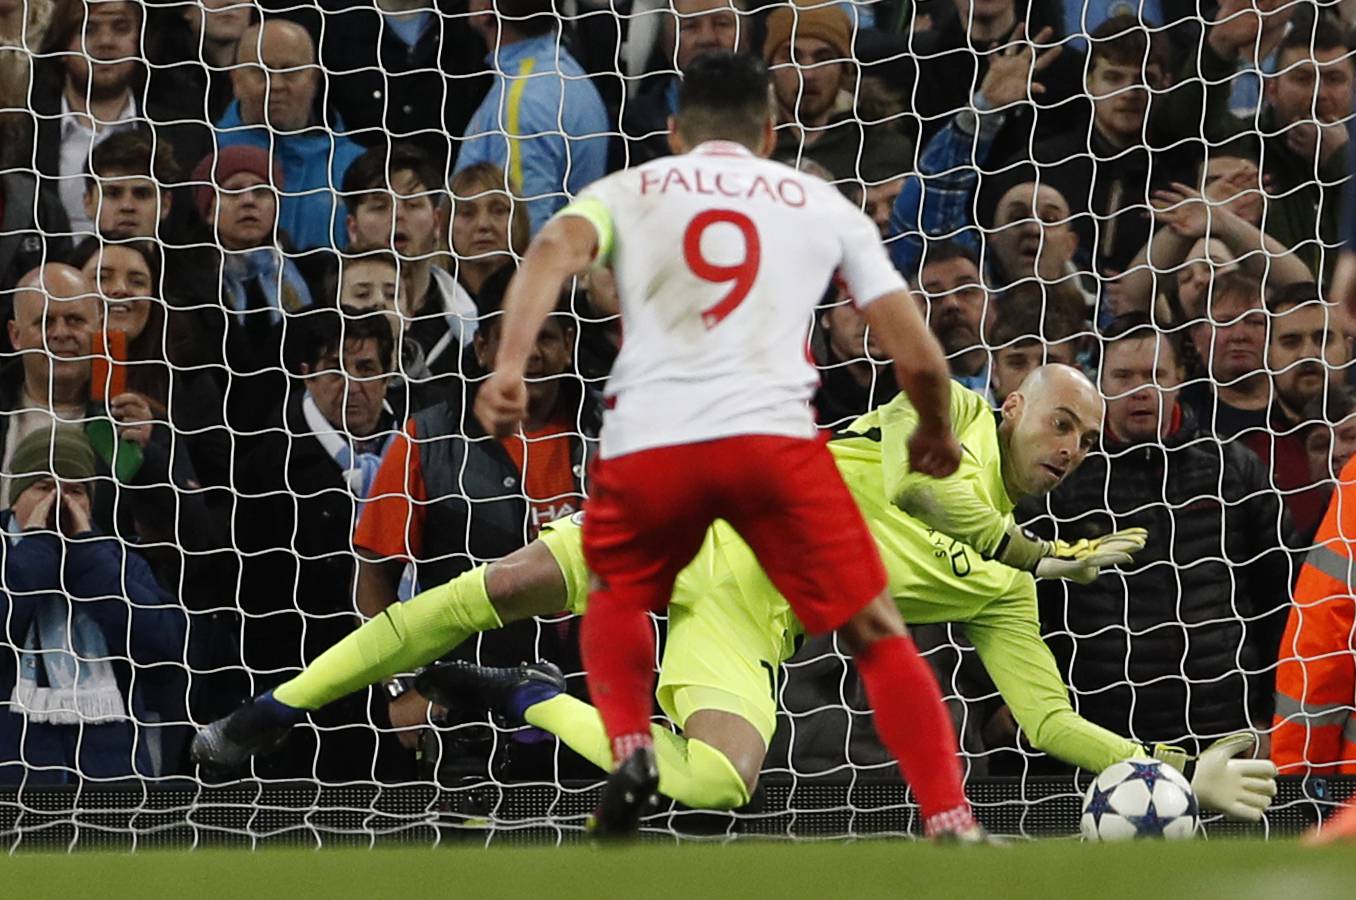 Manchester City's Willy Caballero saves a penalty from Monaco's Radamel Falcao